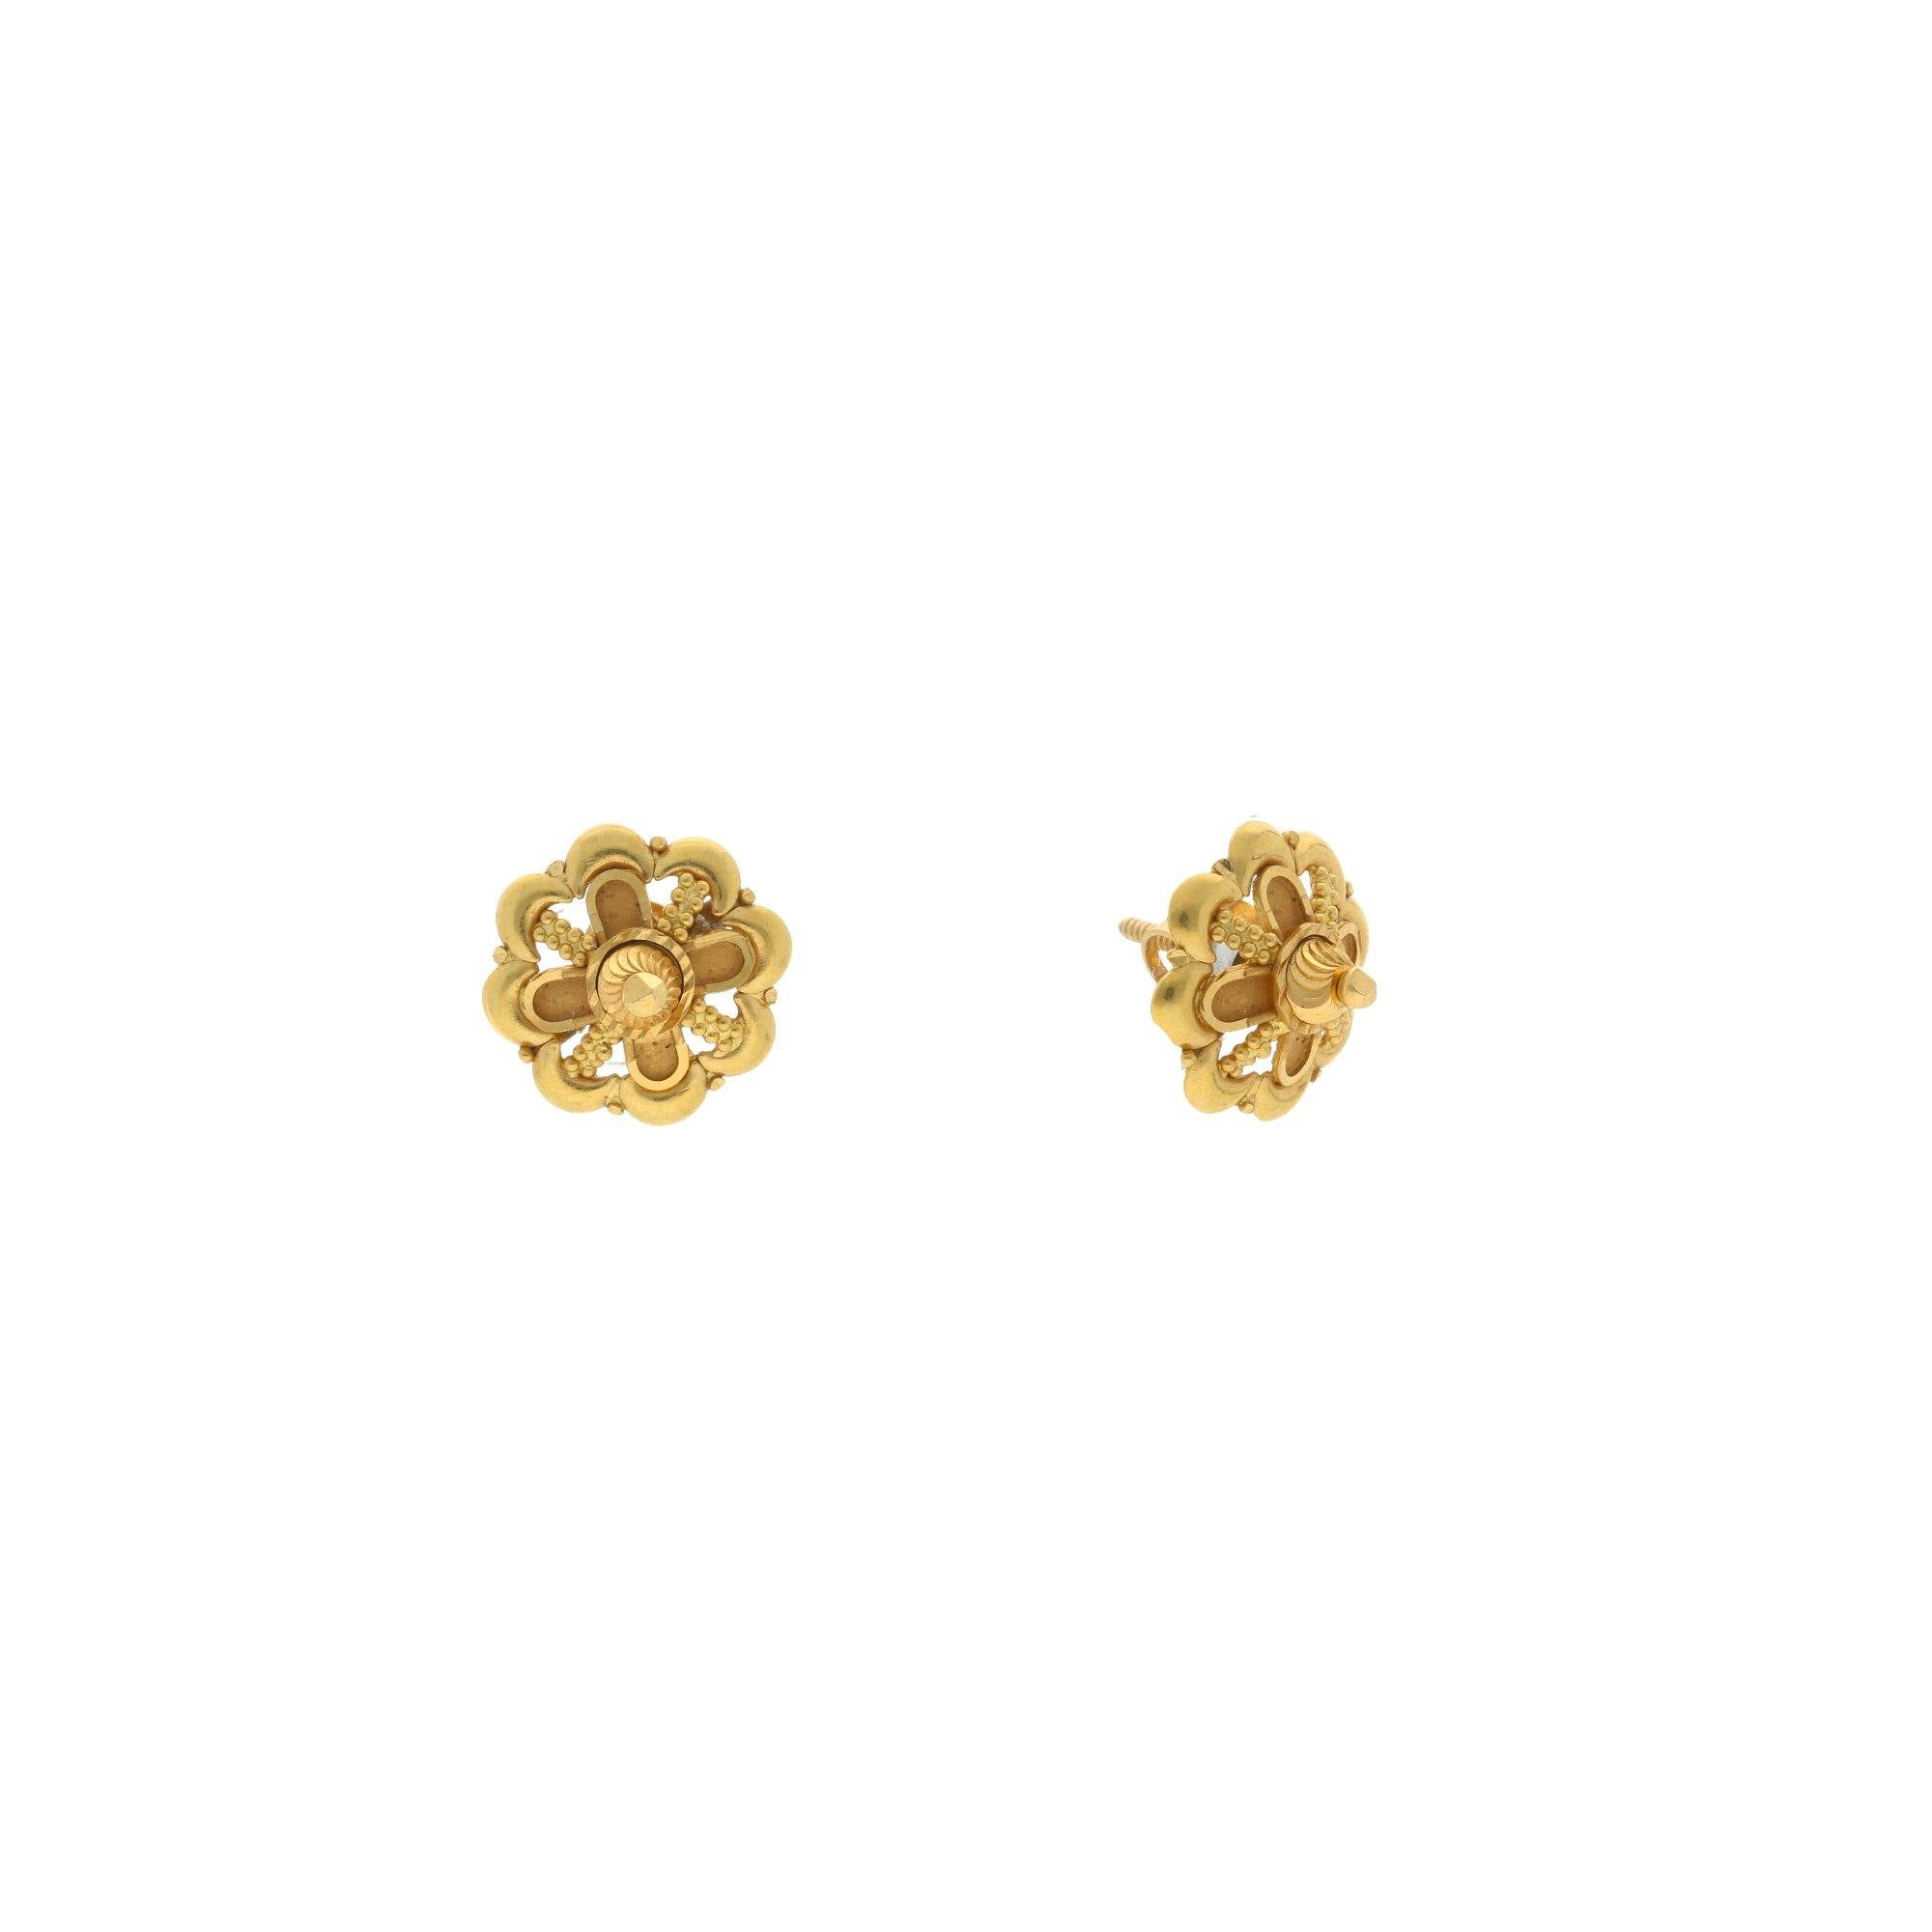 Invest In 3 Gram Gold Earrings For A New, Classy Collection - Alibaba.com